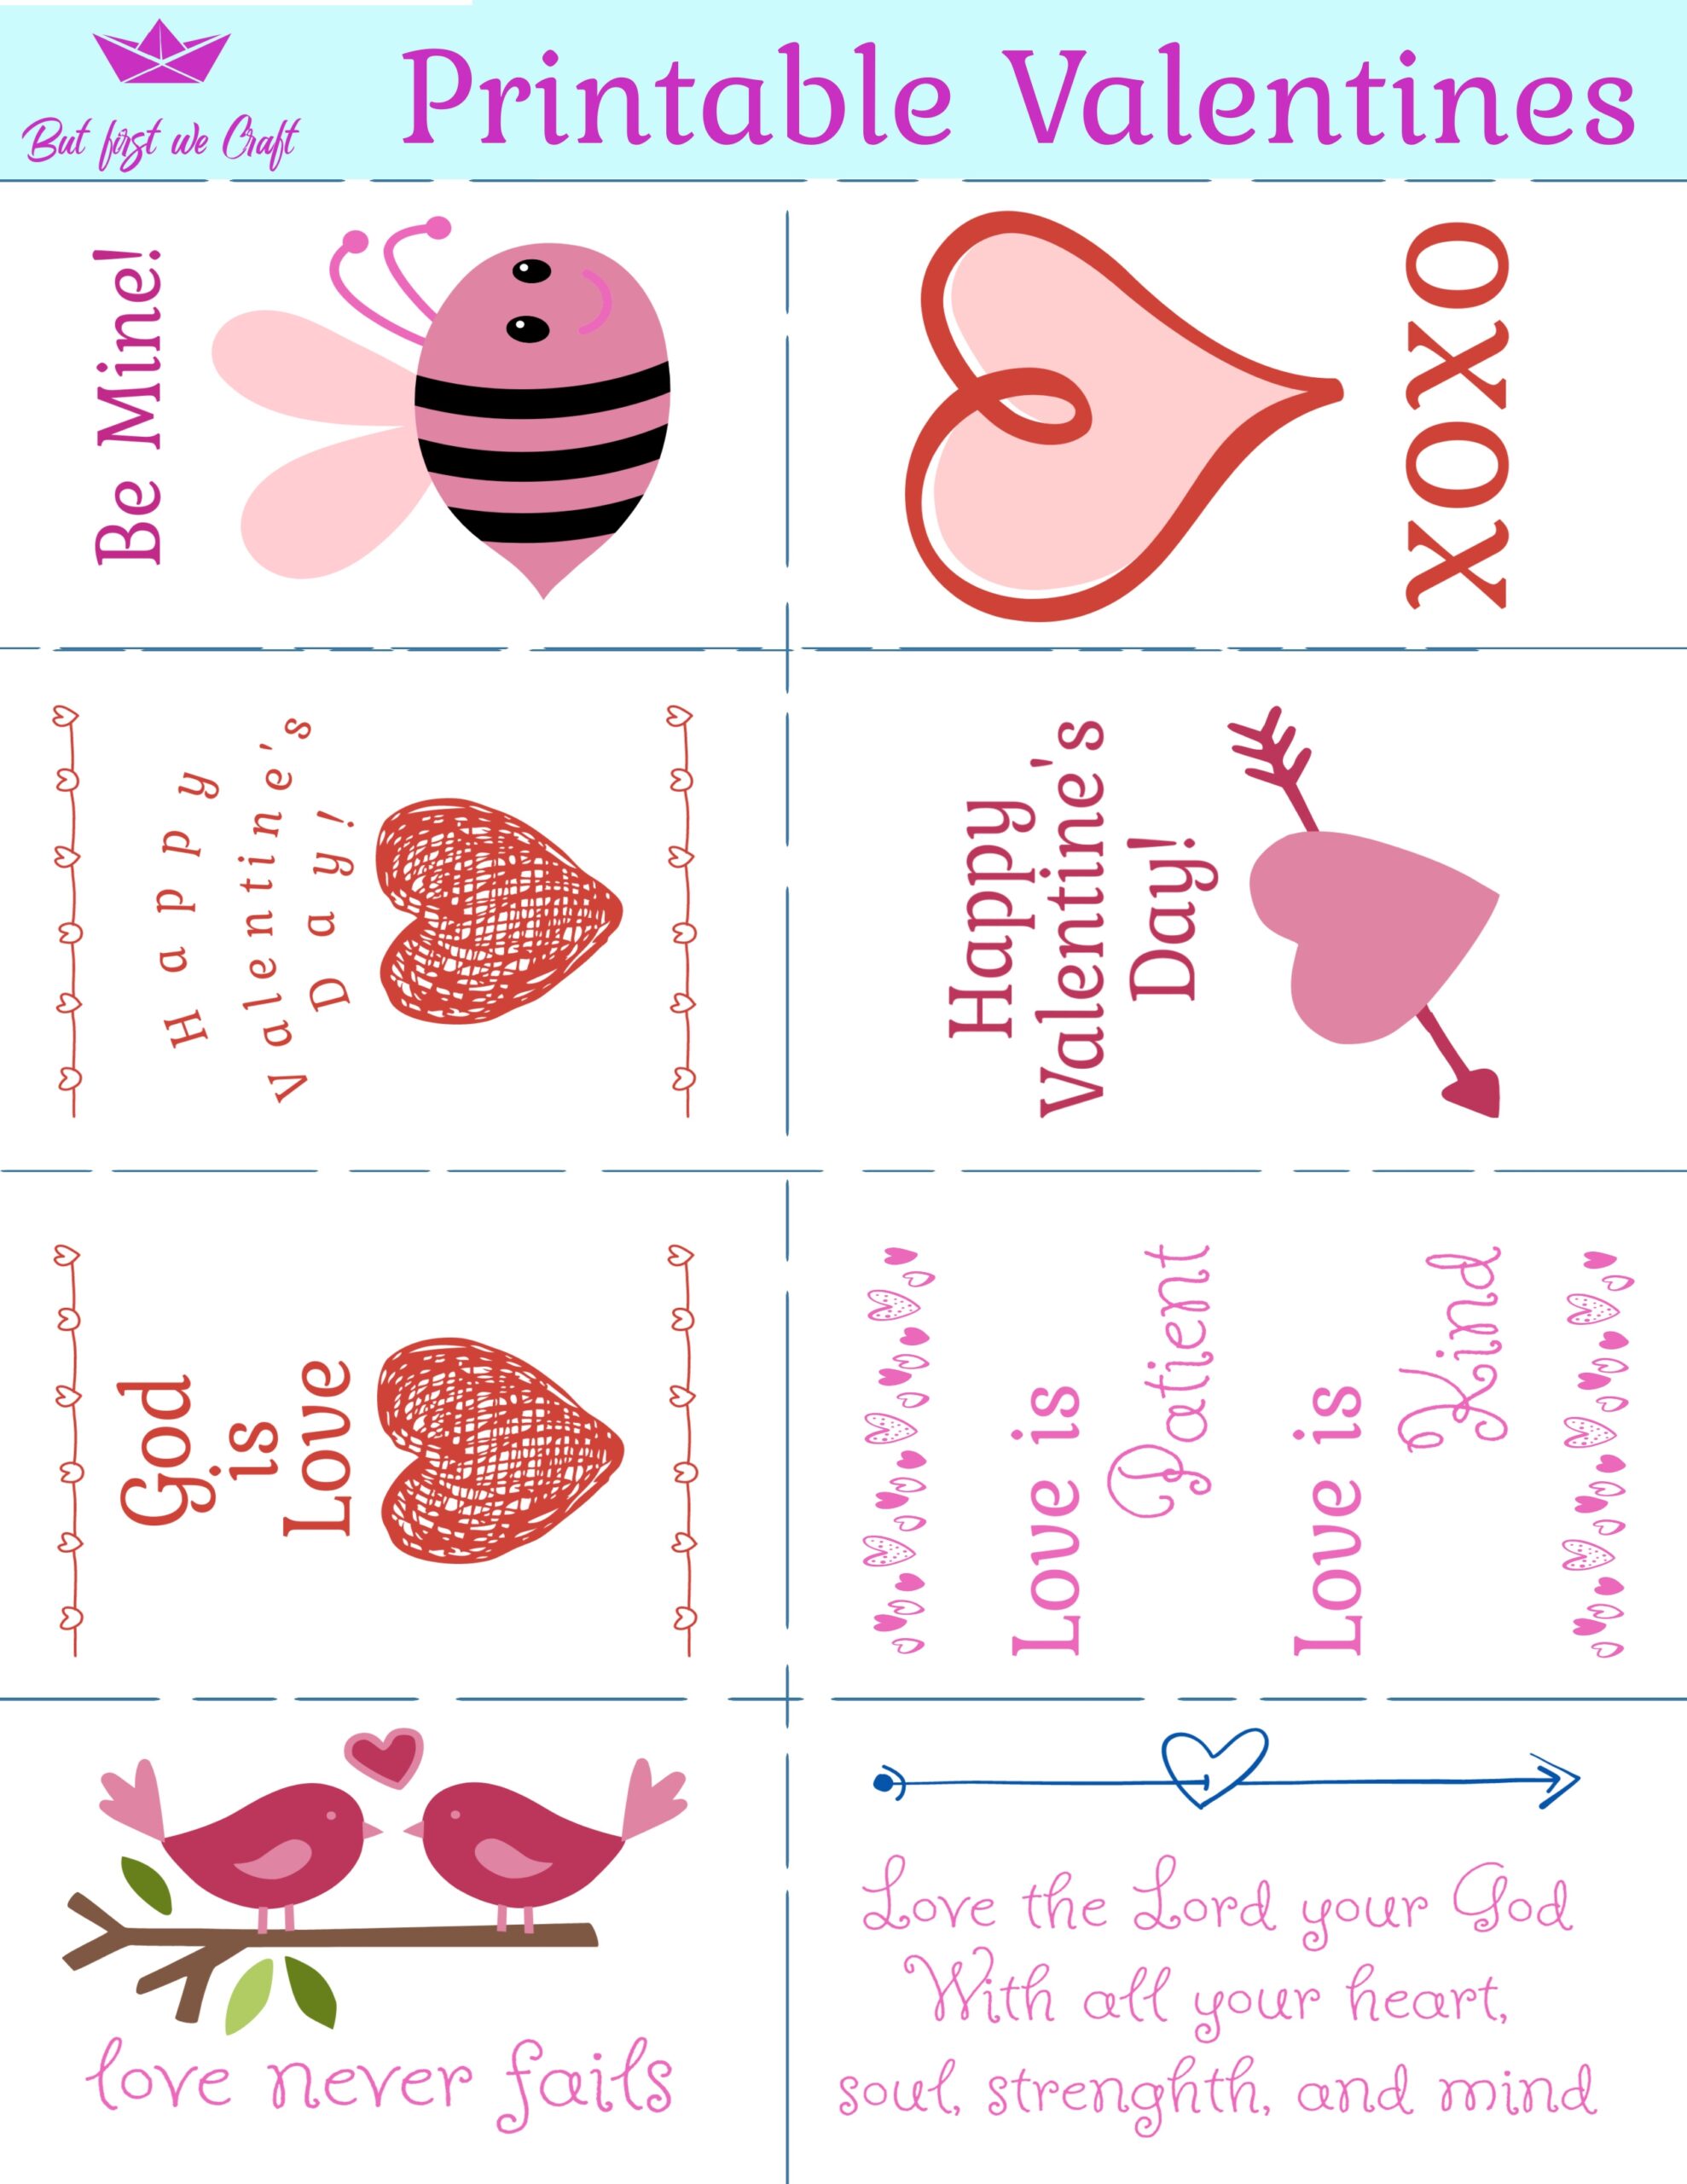 New Free Printable Valentine s Day Cards For Kids But First We Craft - Free Printable Childrens Valentines Day Cards